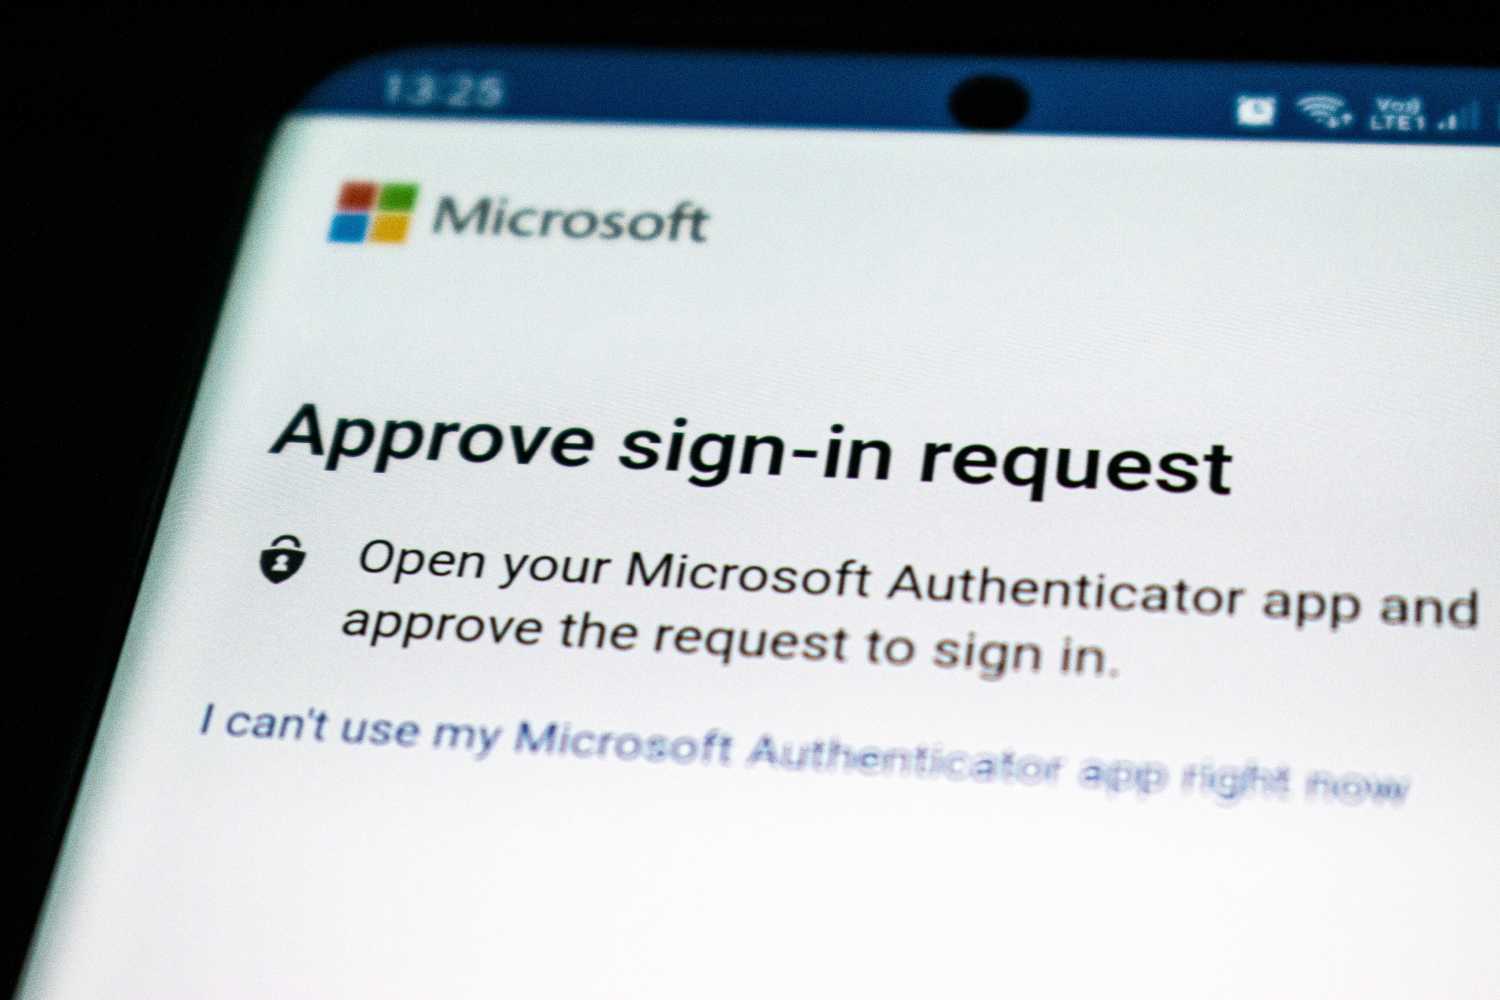 Microsoft Authenticator app open on a mobile phone screen